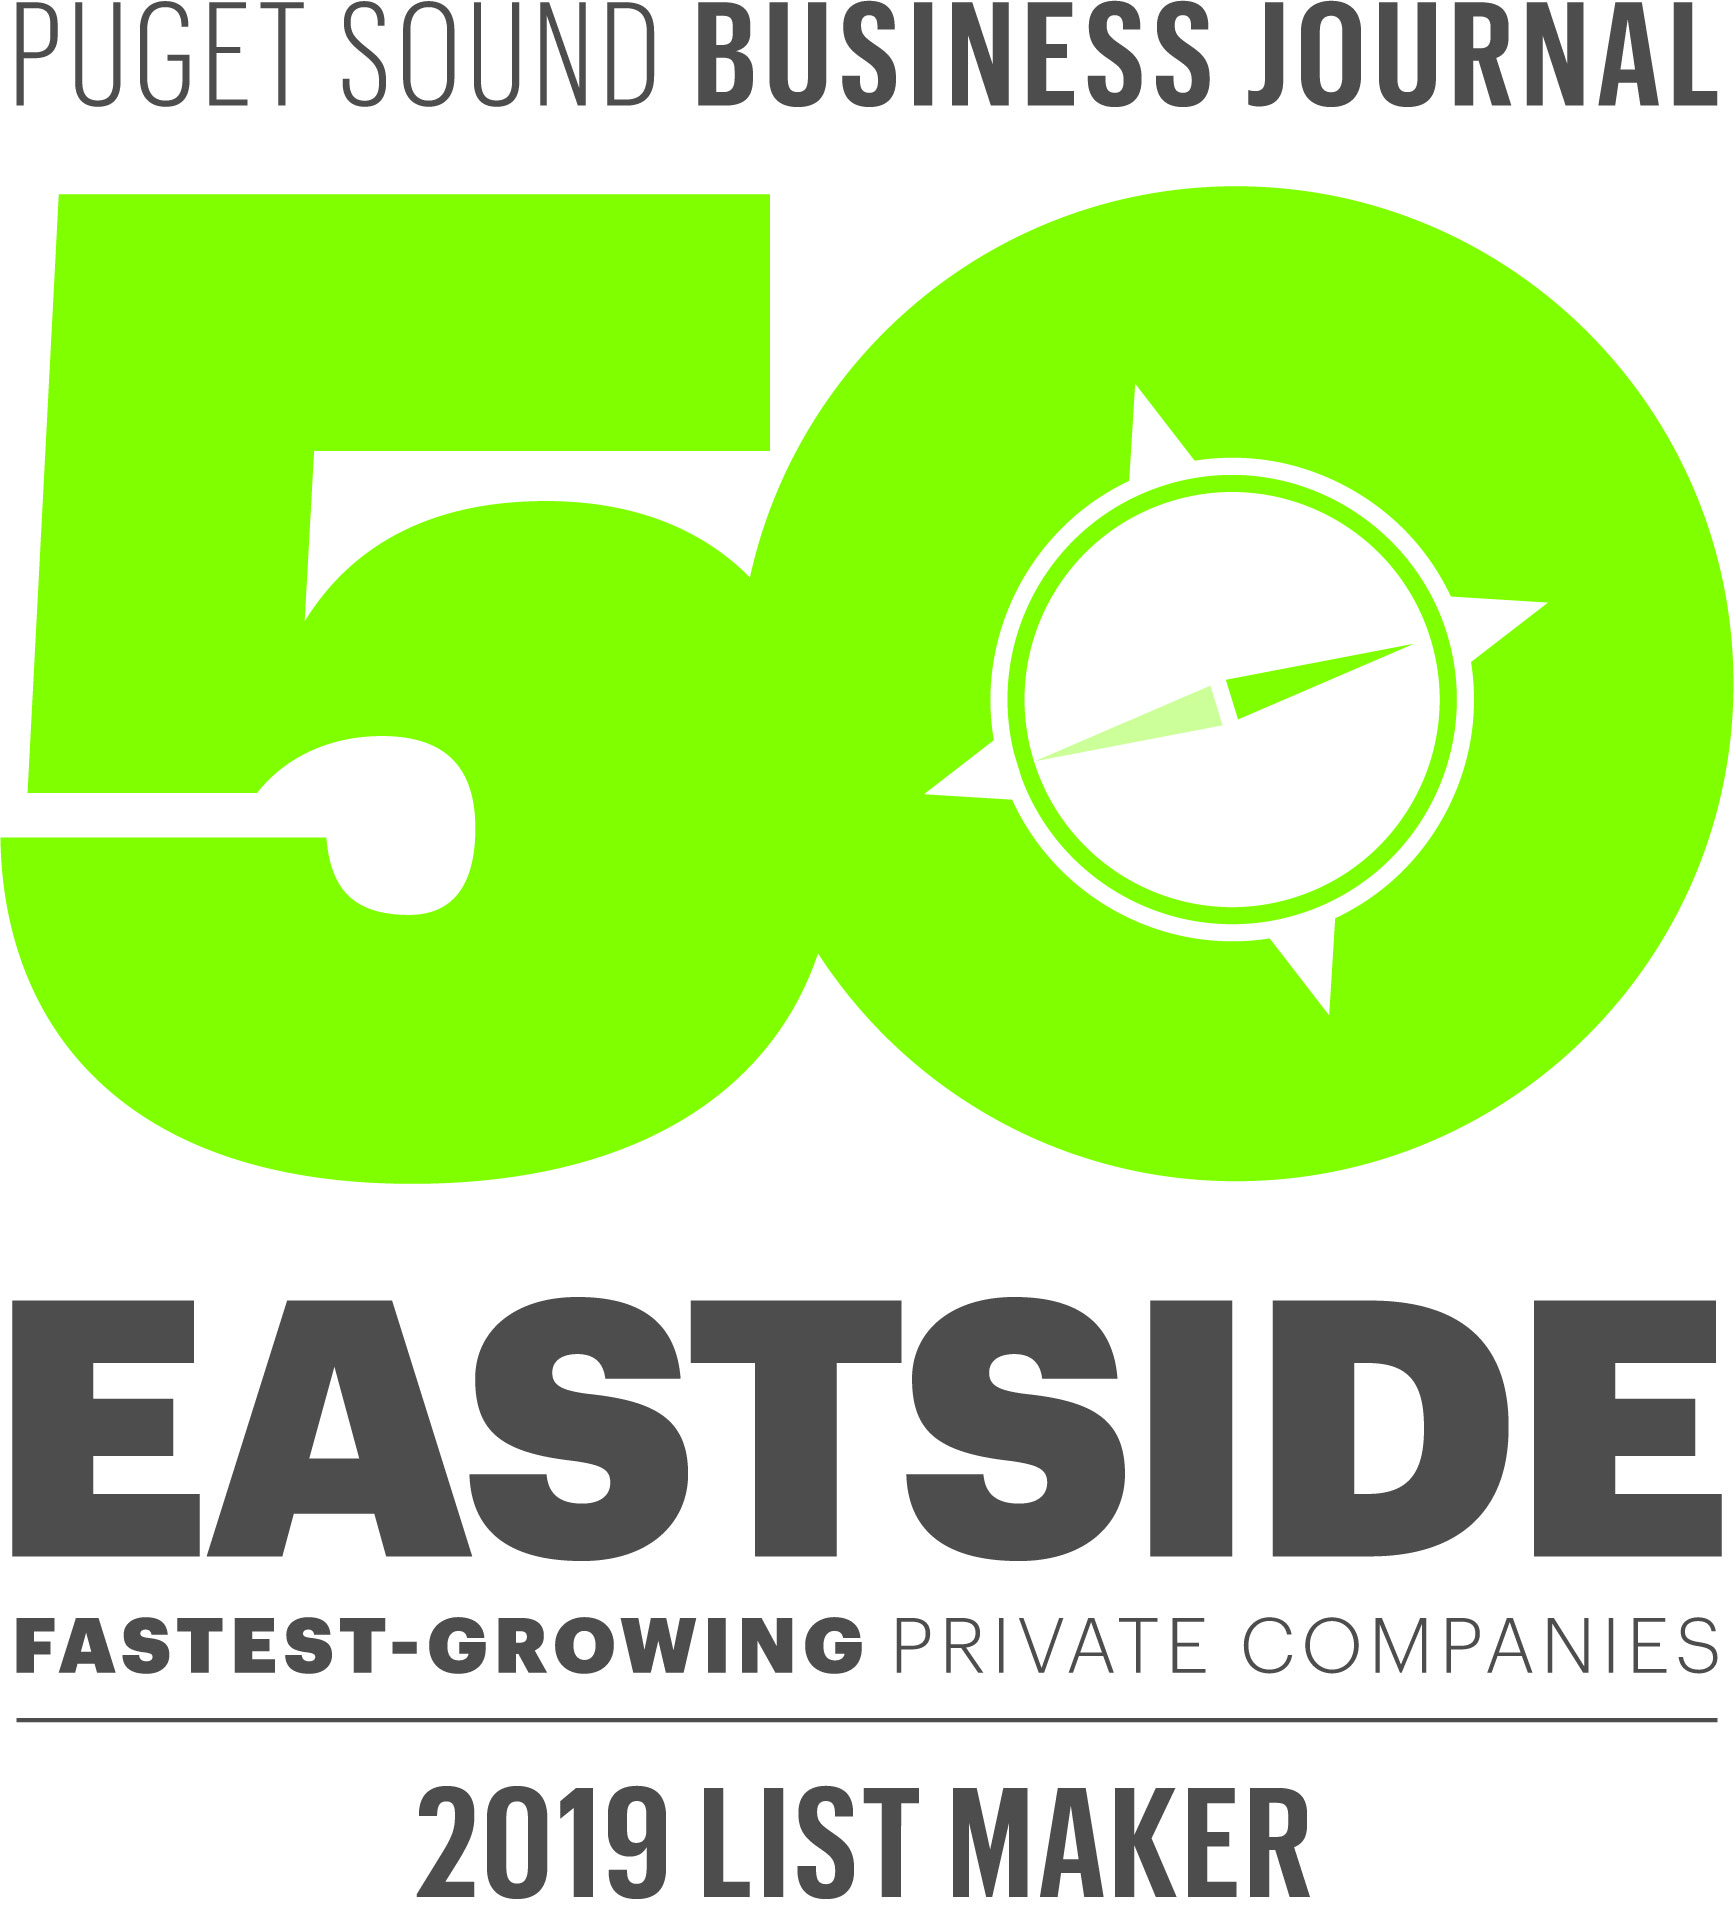 Avenge Digital Ranks 8th in the Puget Sound Business Journal: Eastside Fastest-Growing Private Companies